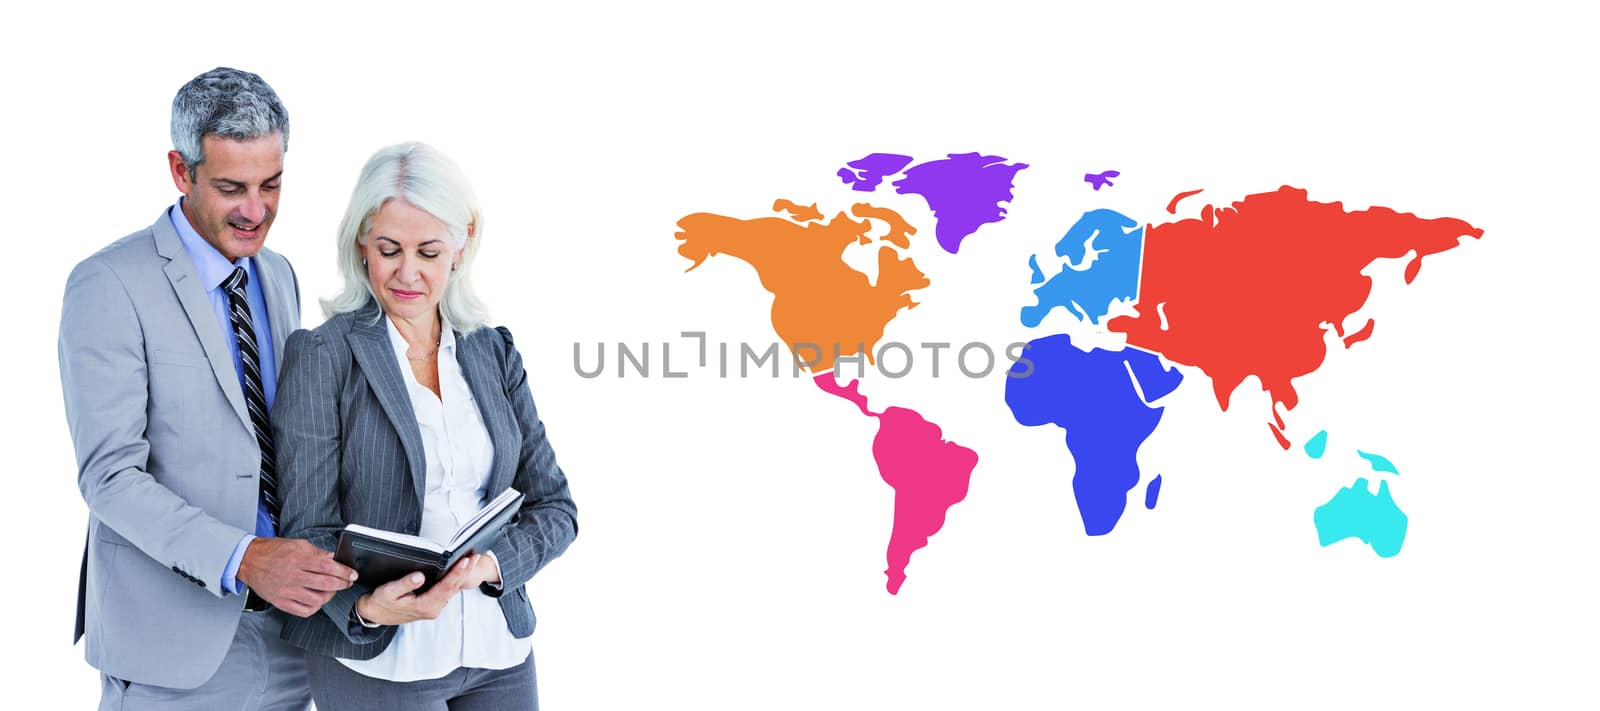  Smiling businesswoman and man with a notebook against colourful world map